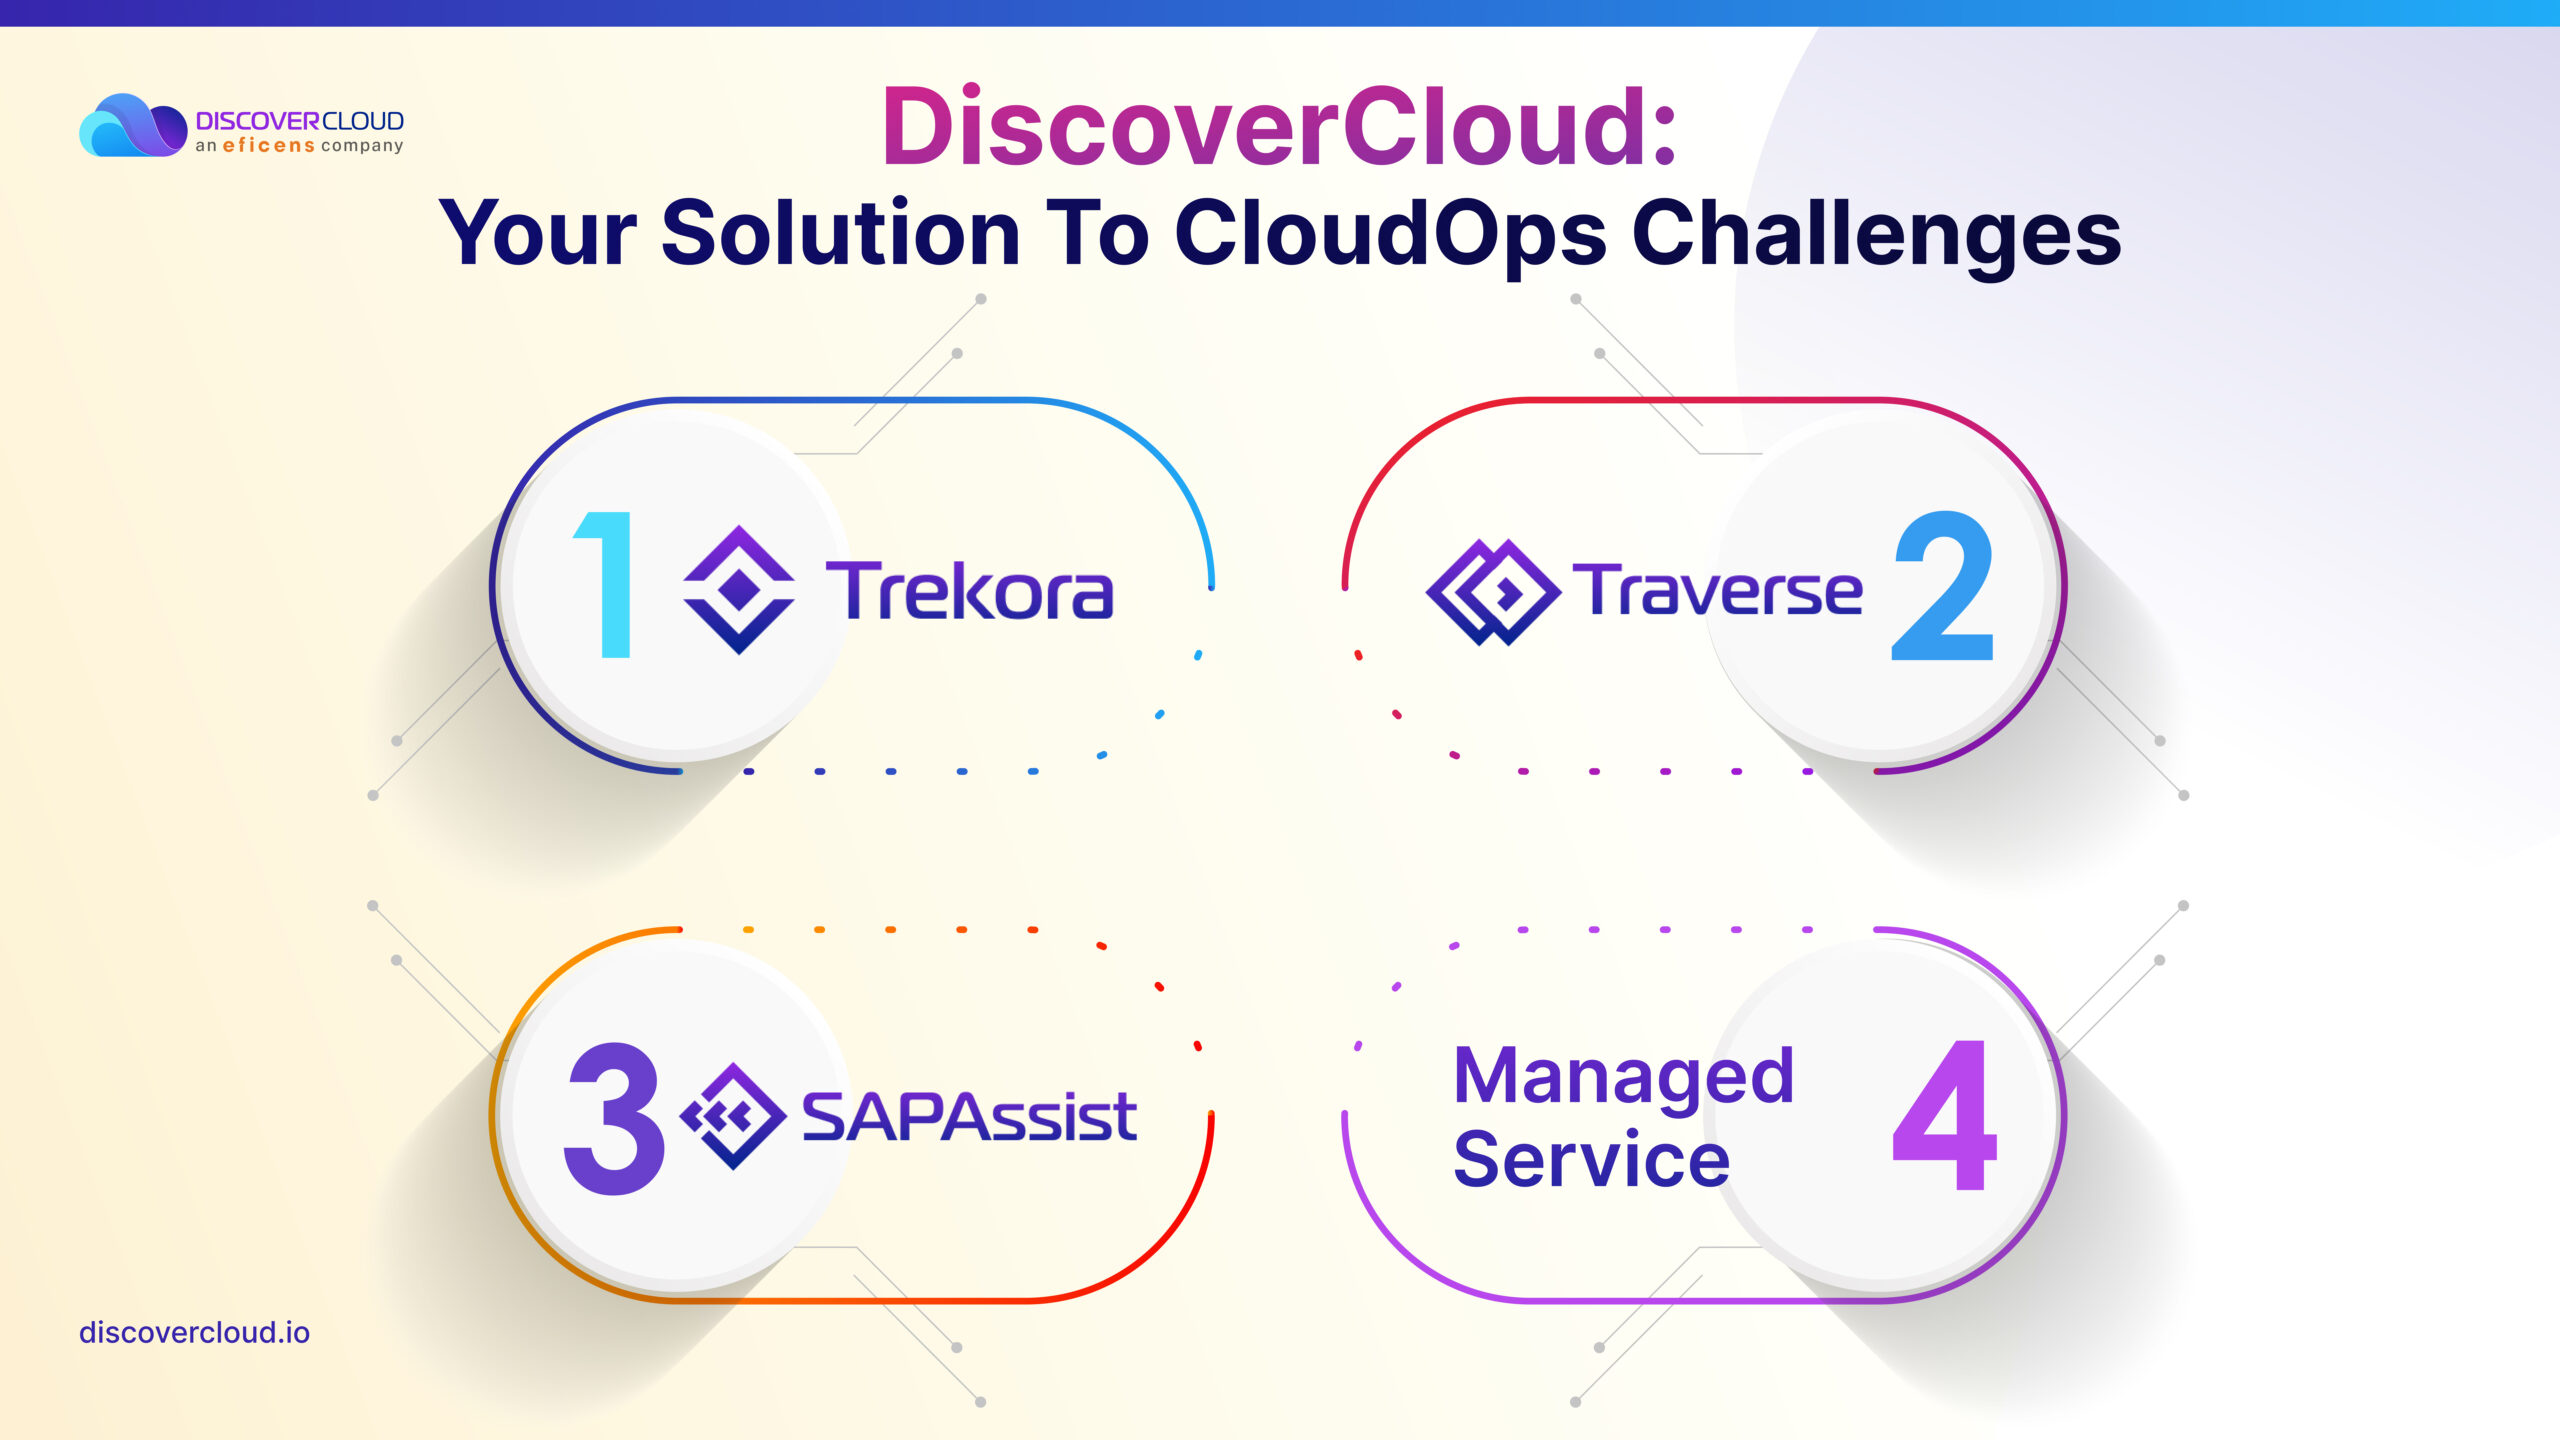 DiscoverCloud: Your Solution to CloudOps Challenges